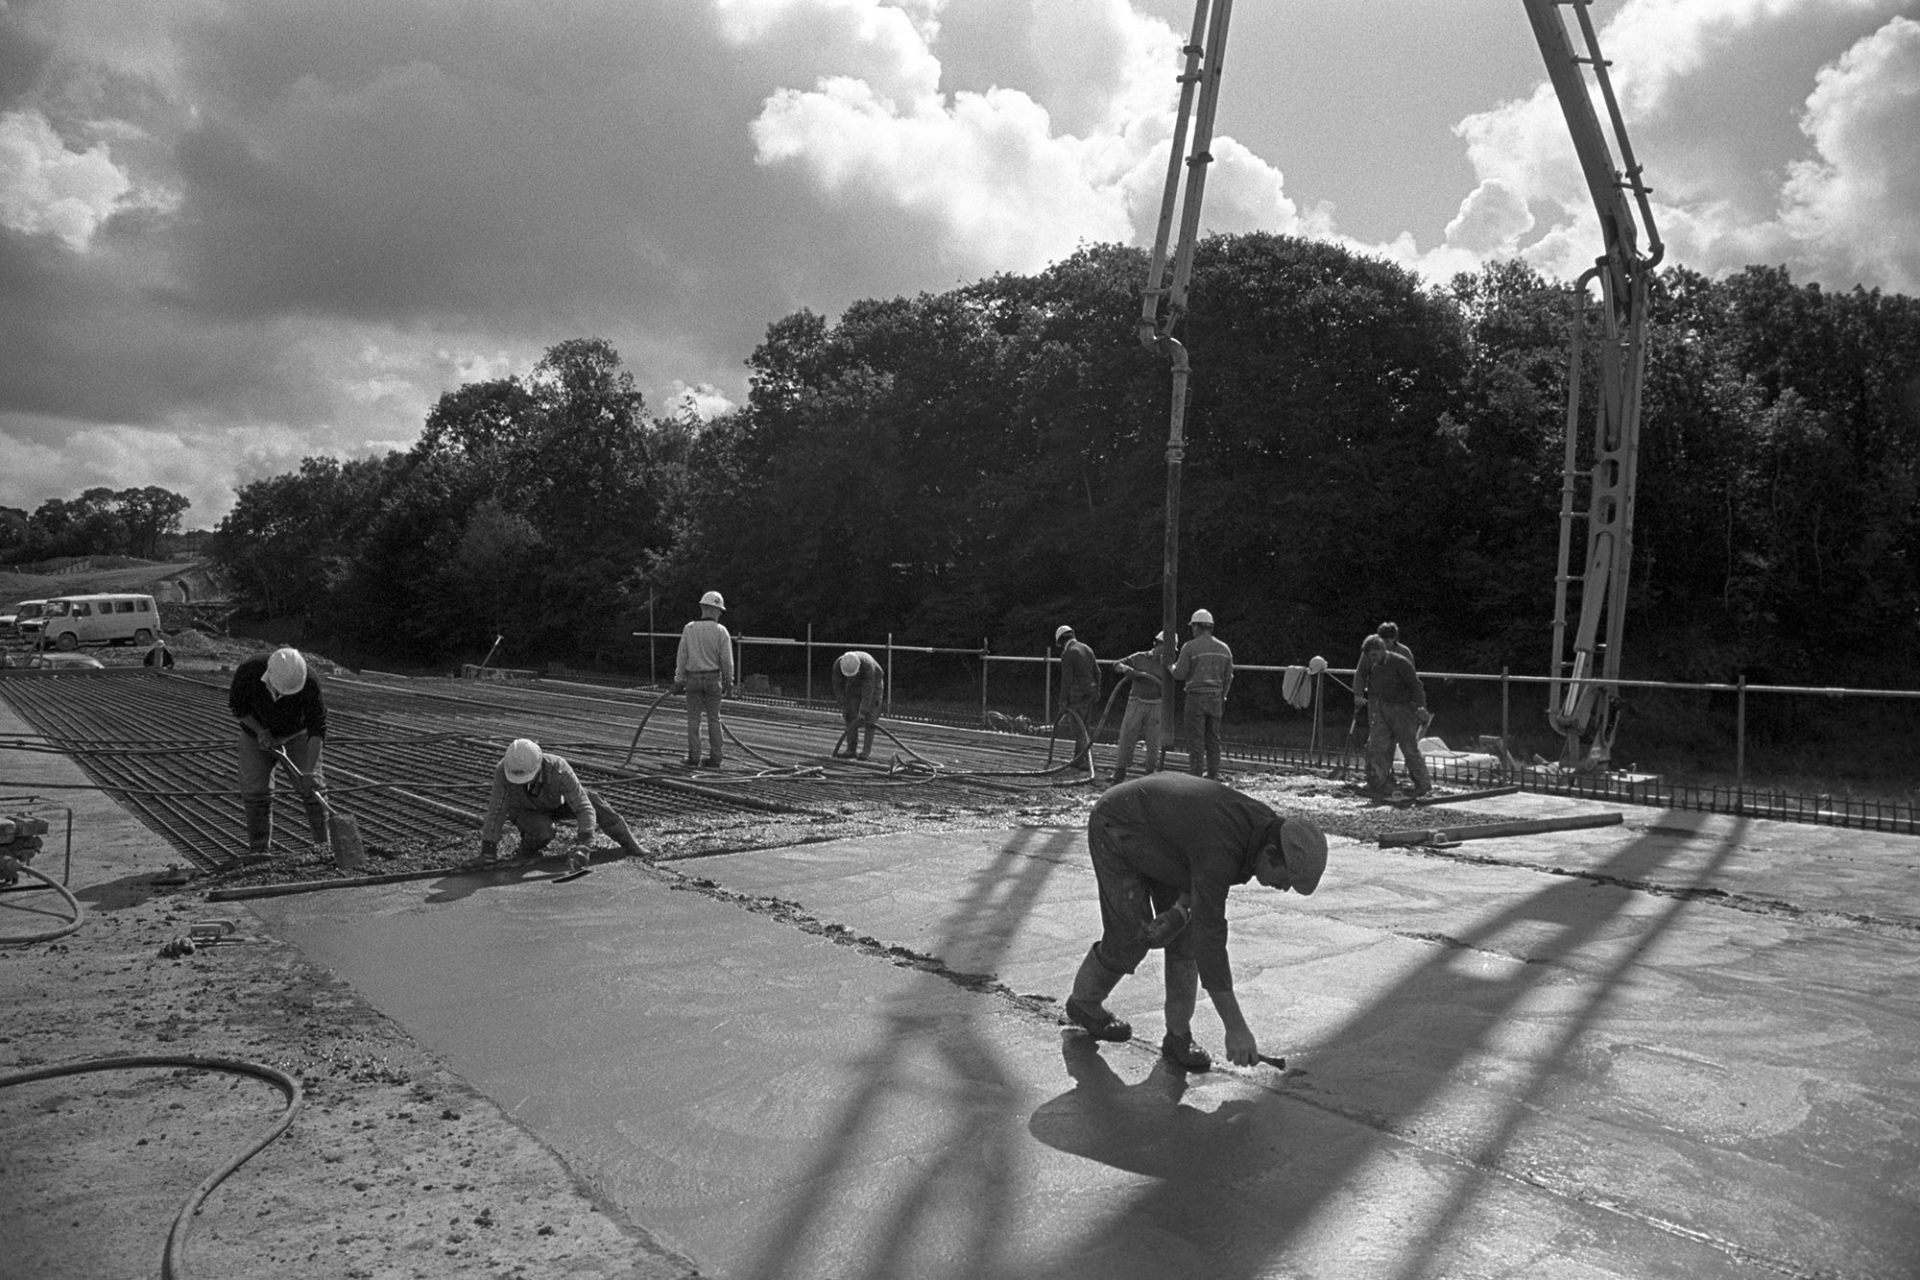 Men building new link road laying cement delivered by crane, sun and cloud. 
[Men laying cement on the new North Devon Link road or A361 foundations near South Molton. The cement is being pumped in by a crane.]